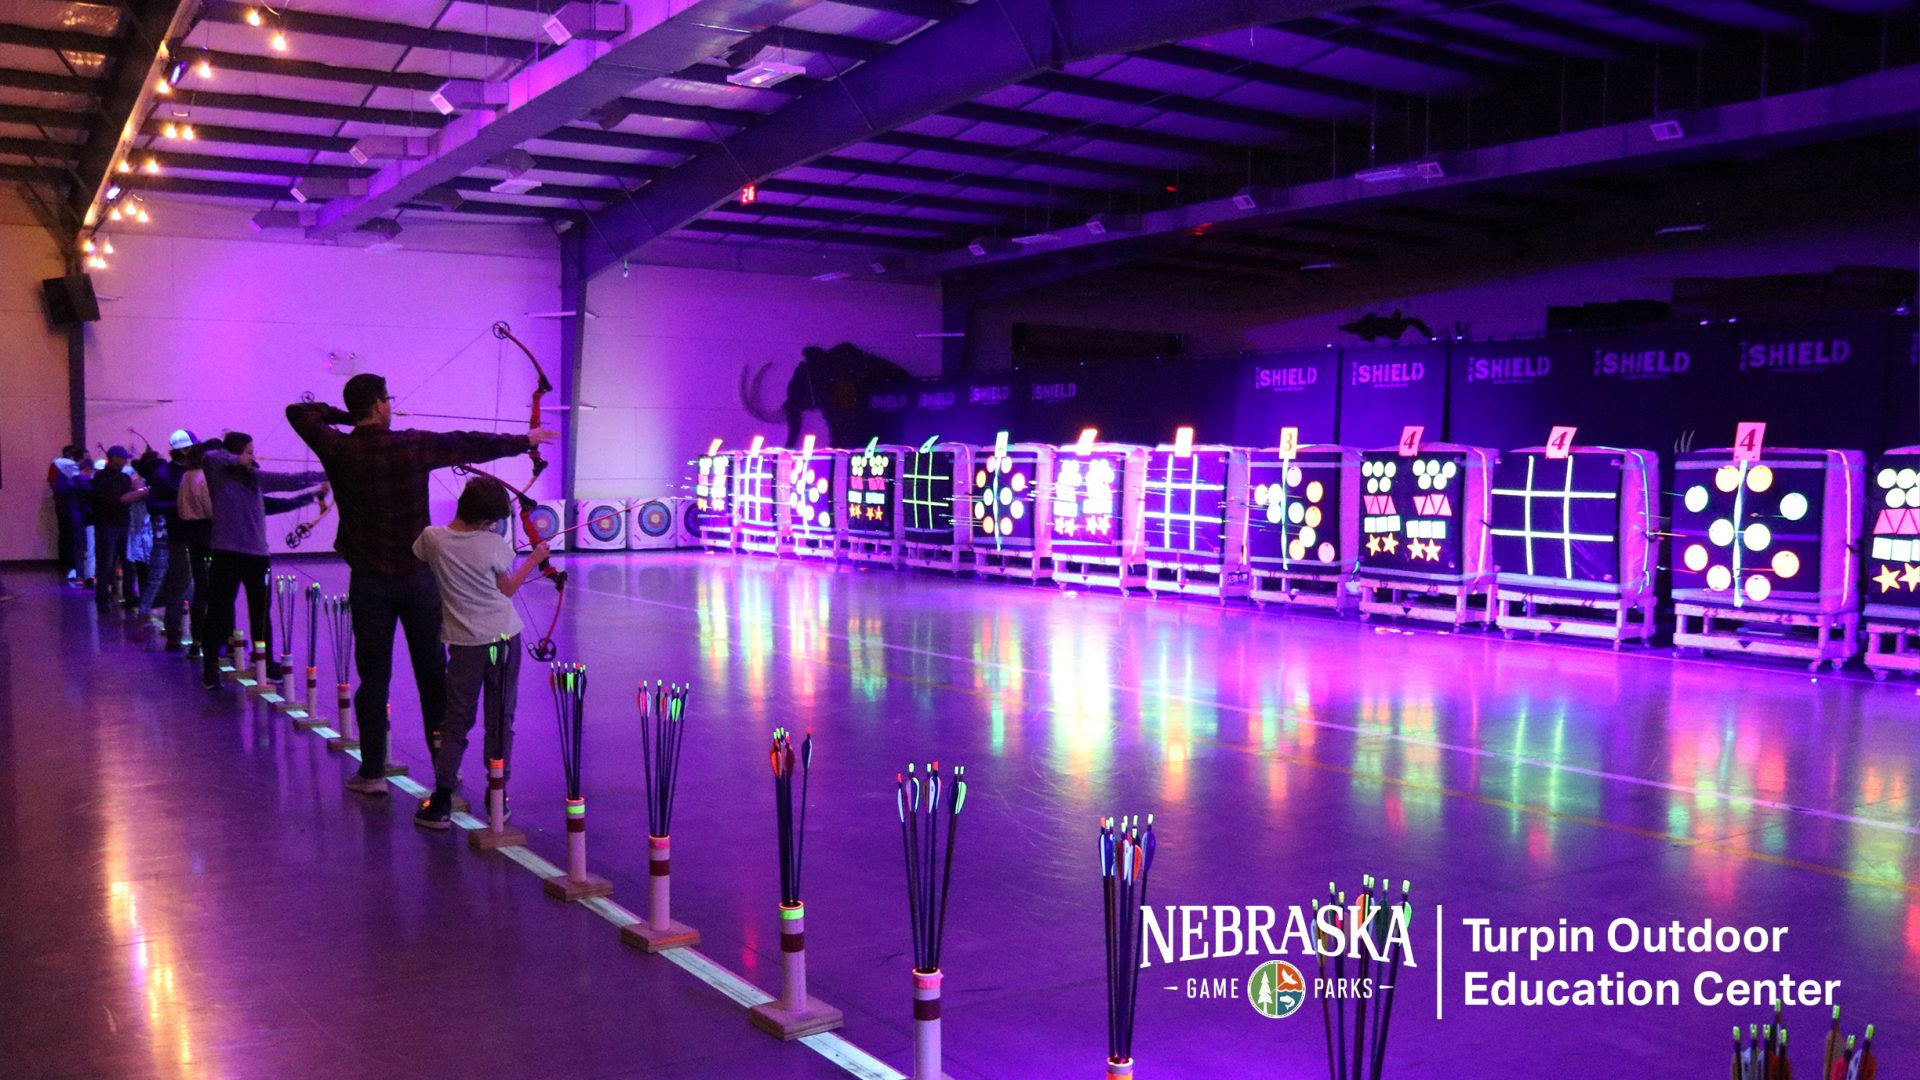 Indoor archery range with purple lighting and glowing targets